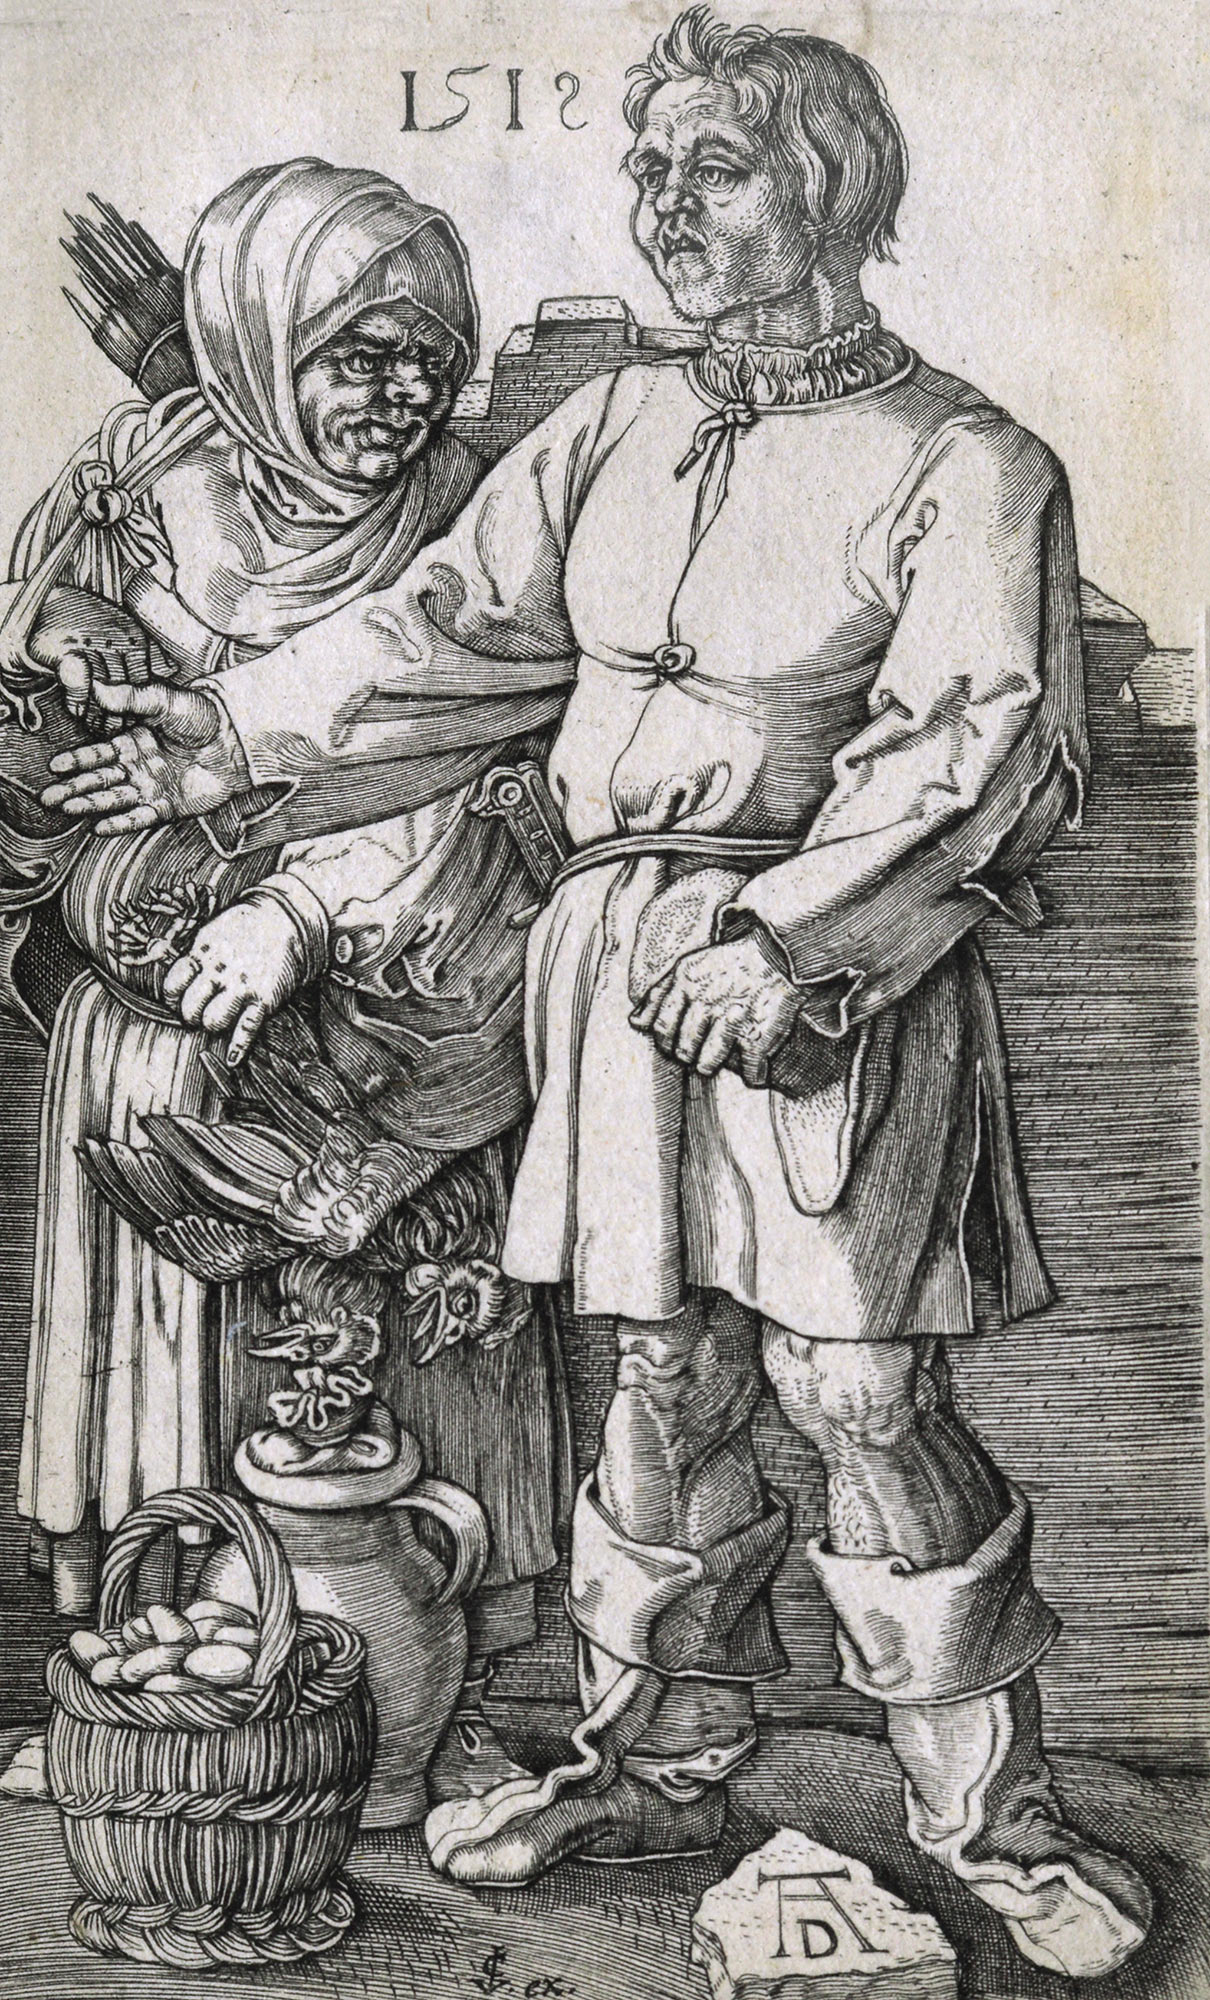 "Peasant couple at the market", 1512